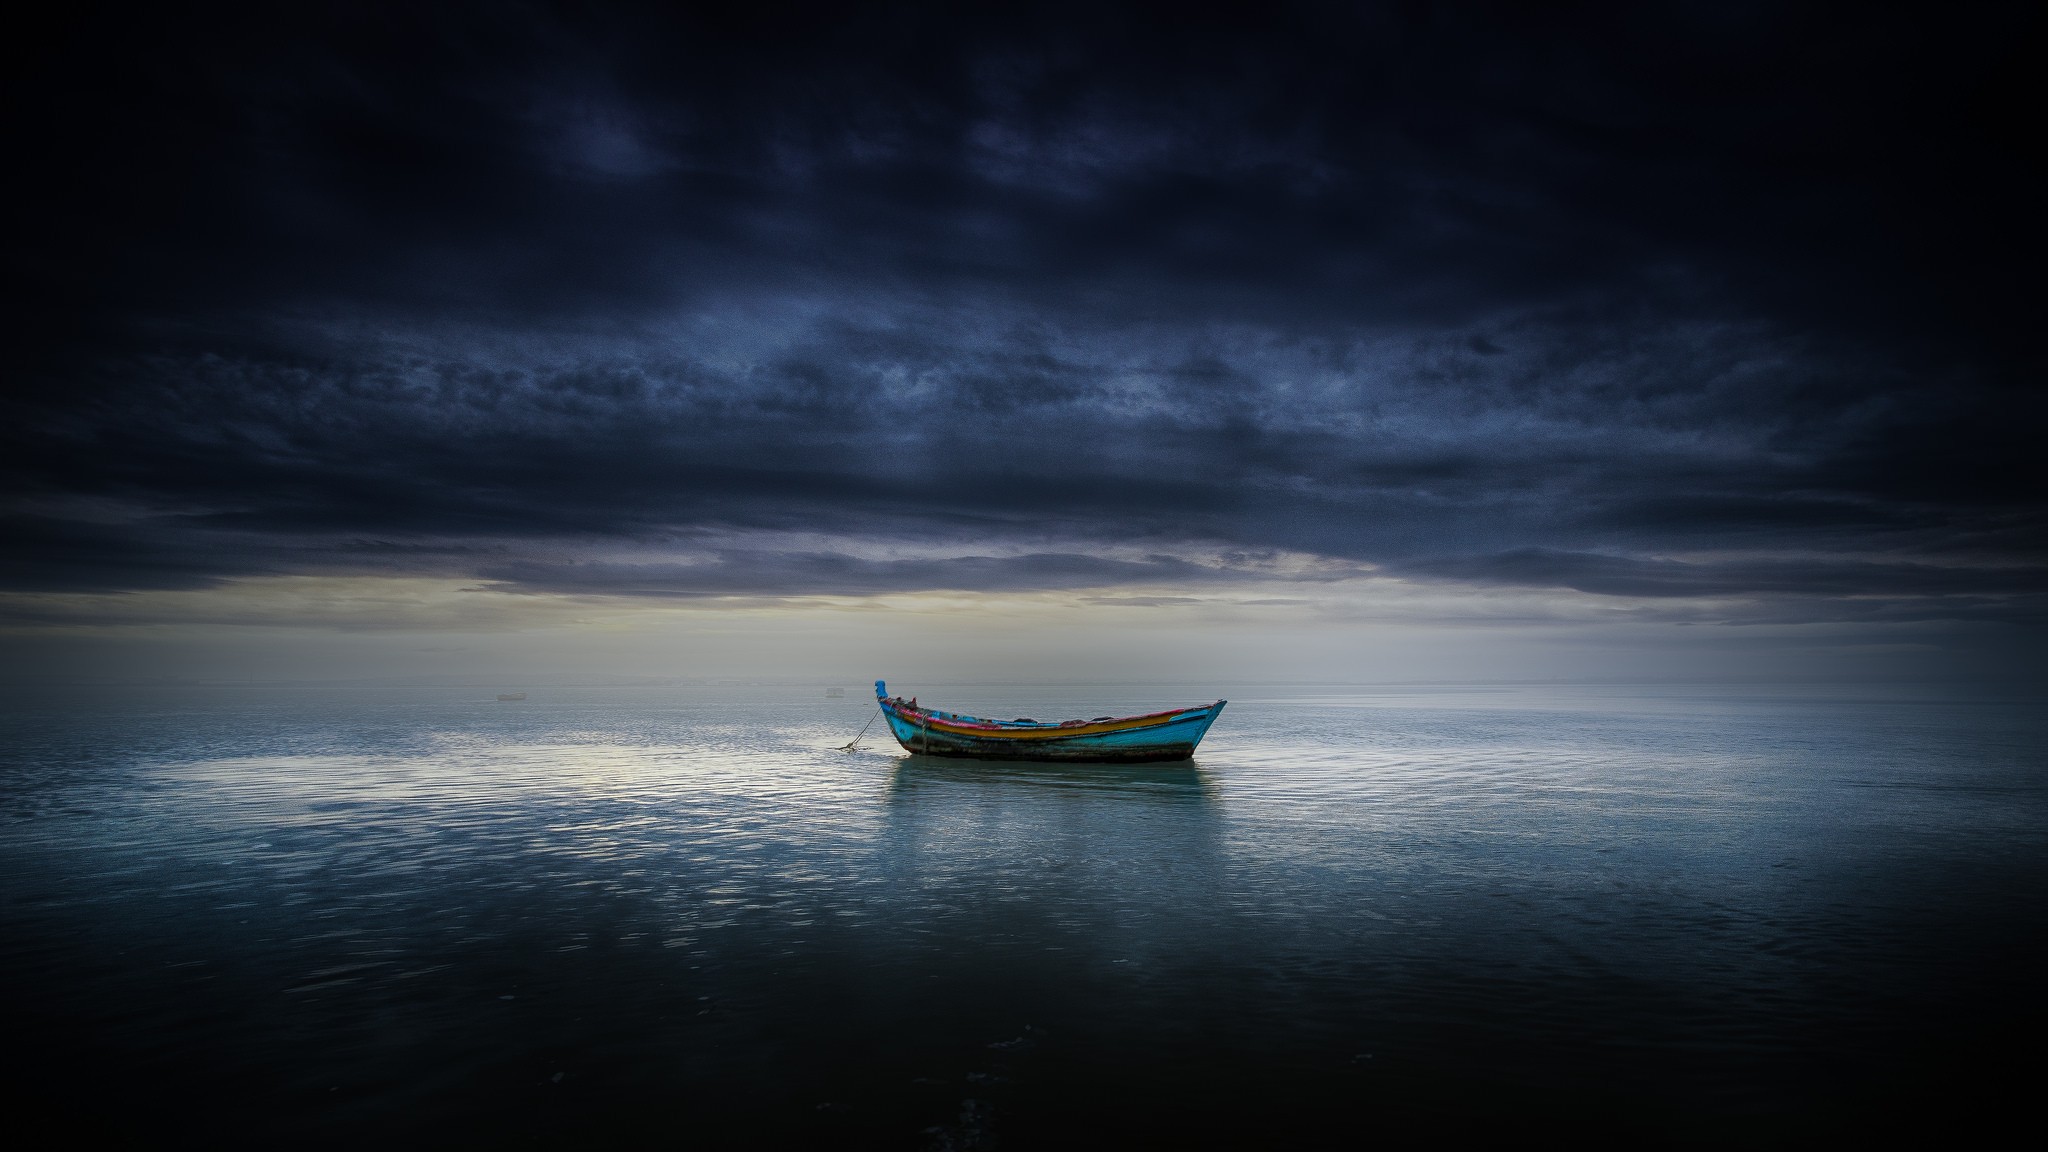 General 2048x1152 sea boat vehicle water nature sky clouds outdoors